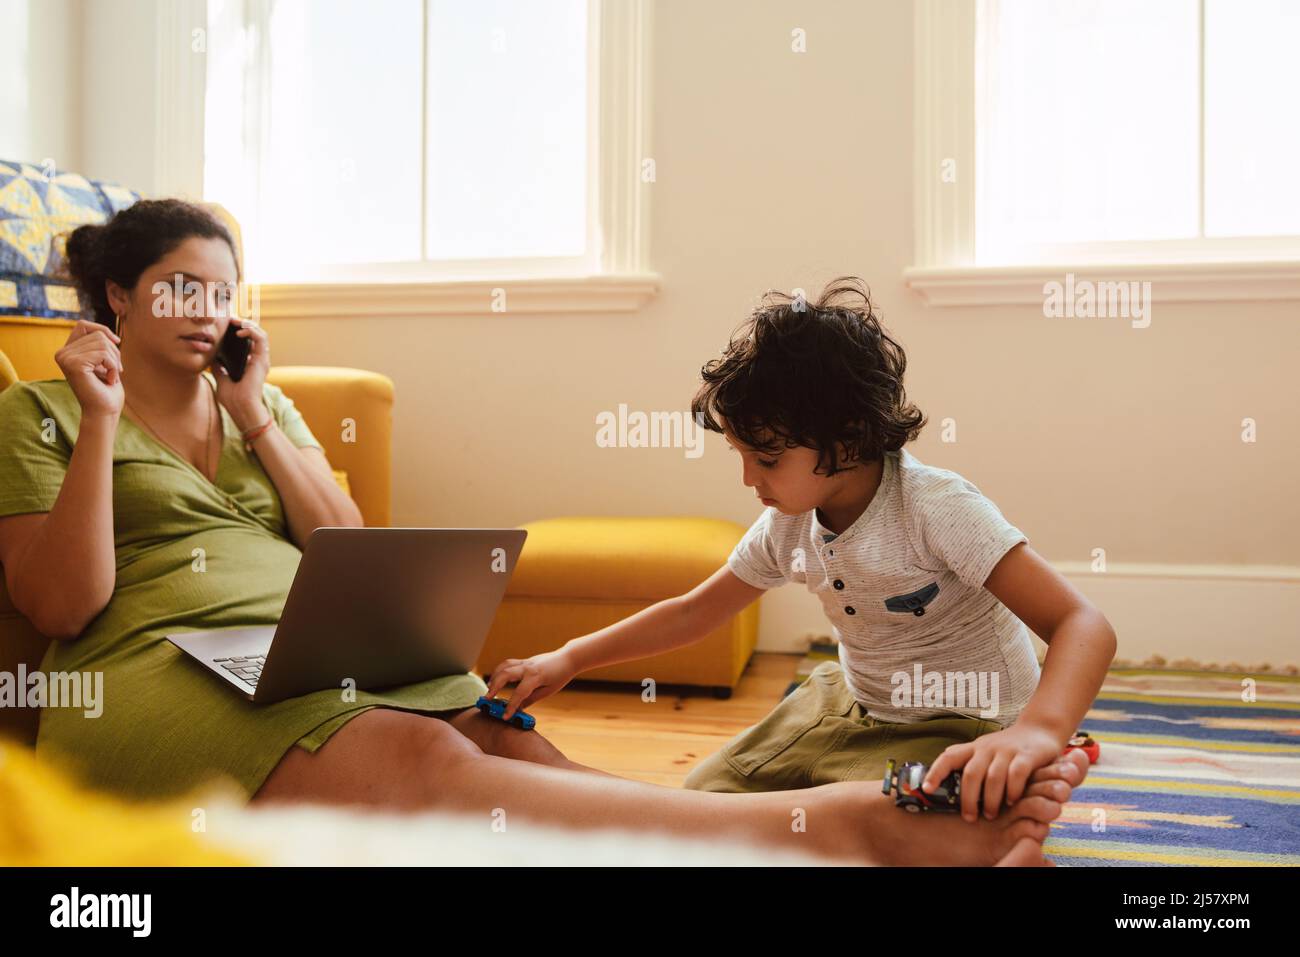 Single mother speaking on the phone while sitting in her son's play area. Working mother making plans with her clients over a phone call. Young self-e Stock Photo